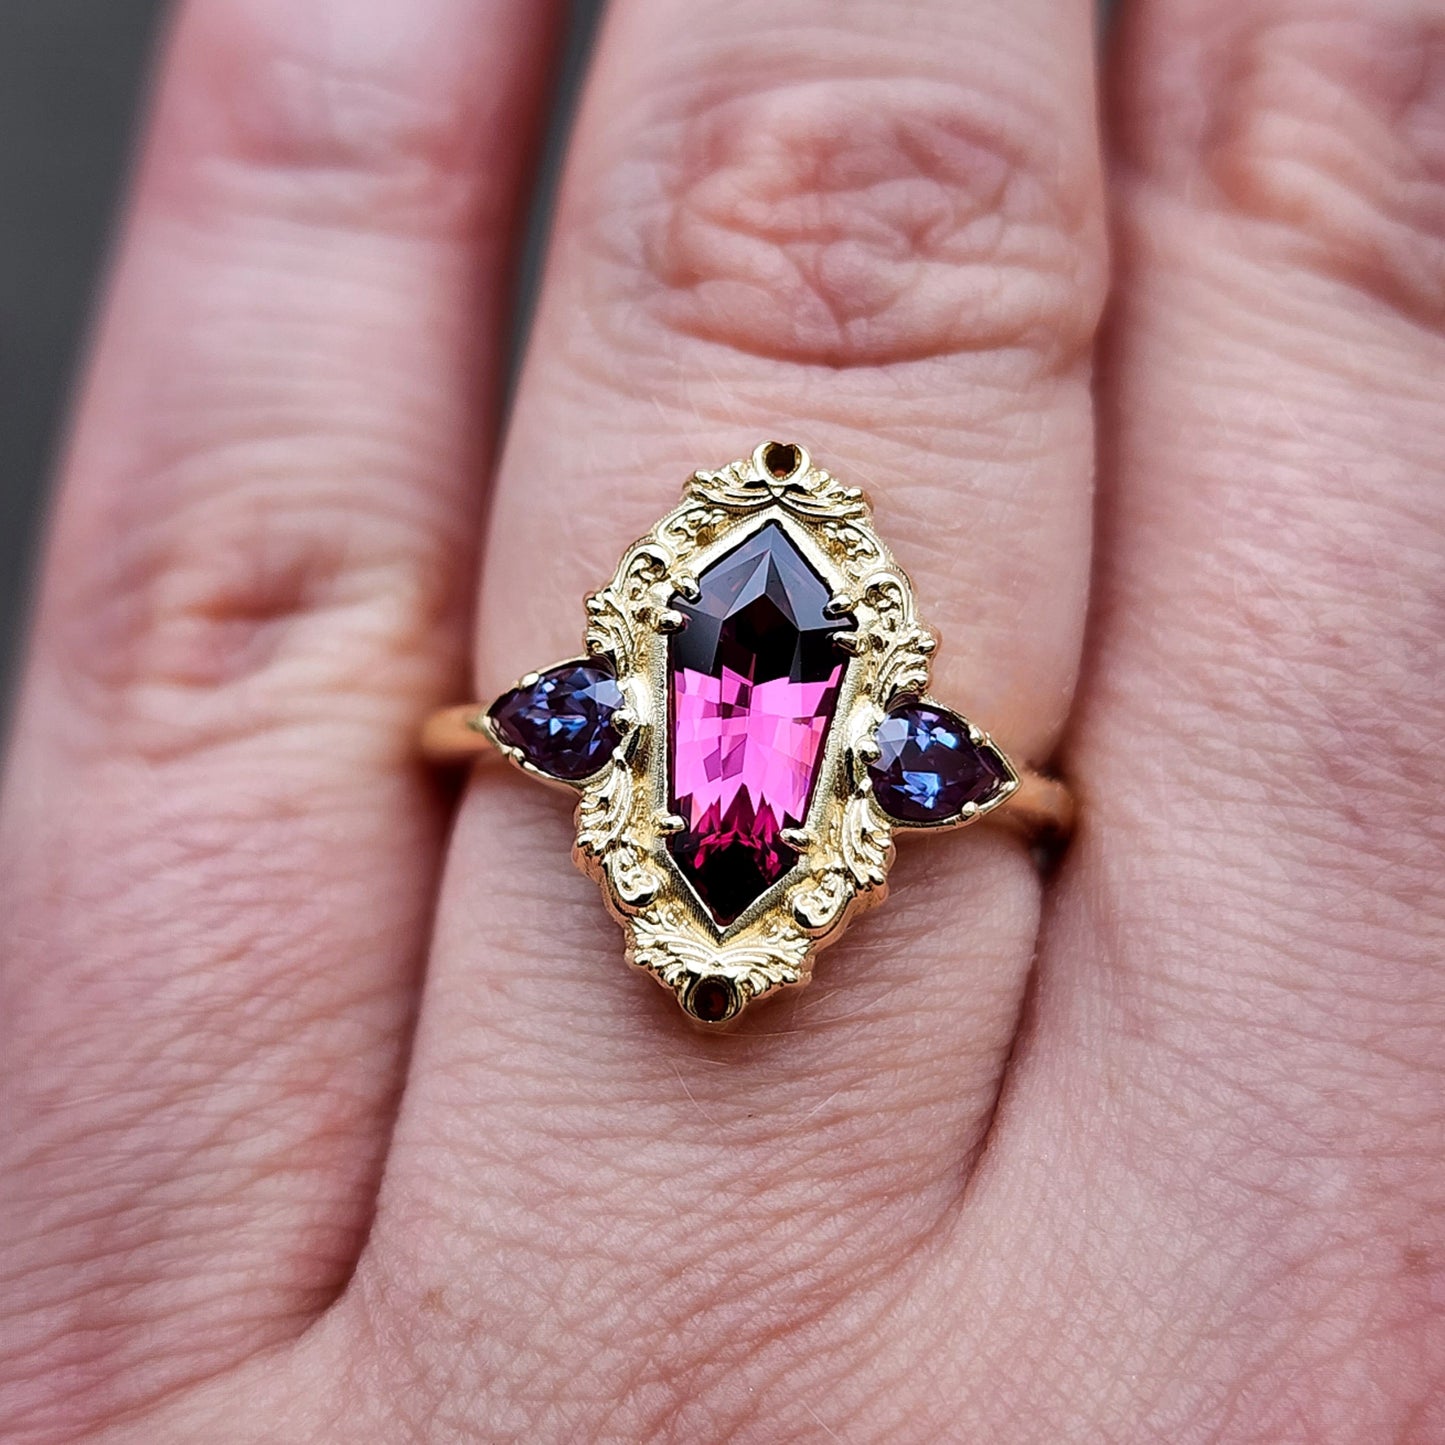 Looking Glass Ring - Fancy Color Change Tanzanian Garnet & Chatham Alexandrite Pear Gold Scroll Ring Size 6-8 14k Yellow Gold